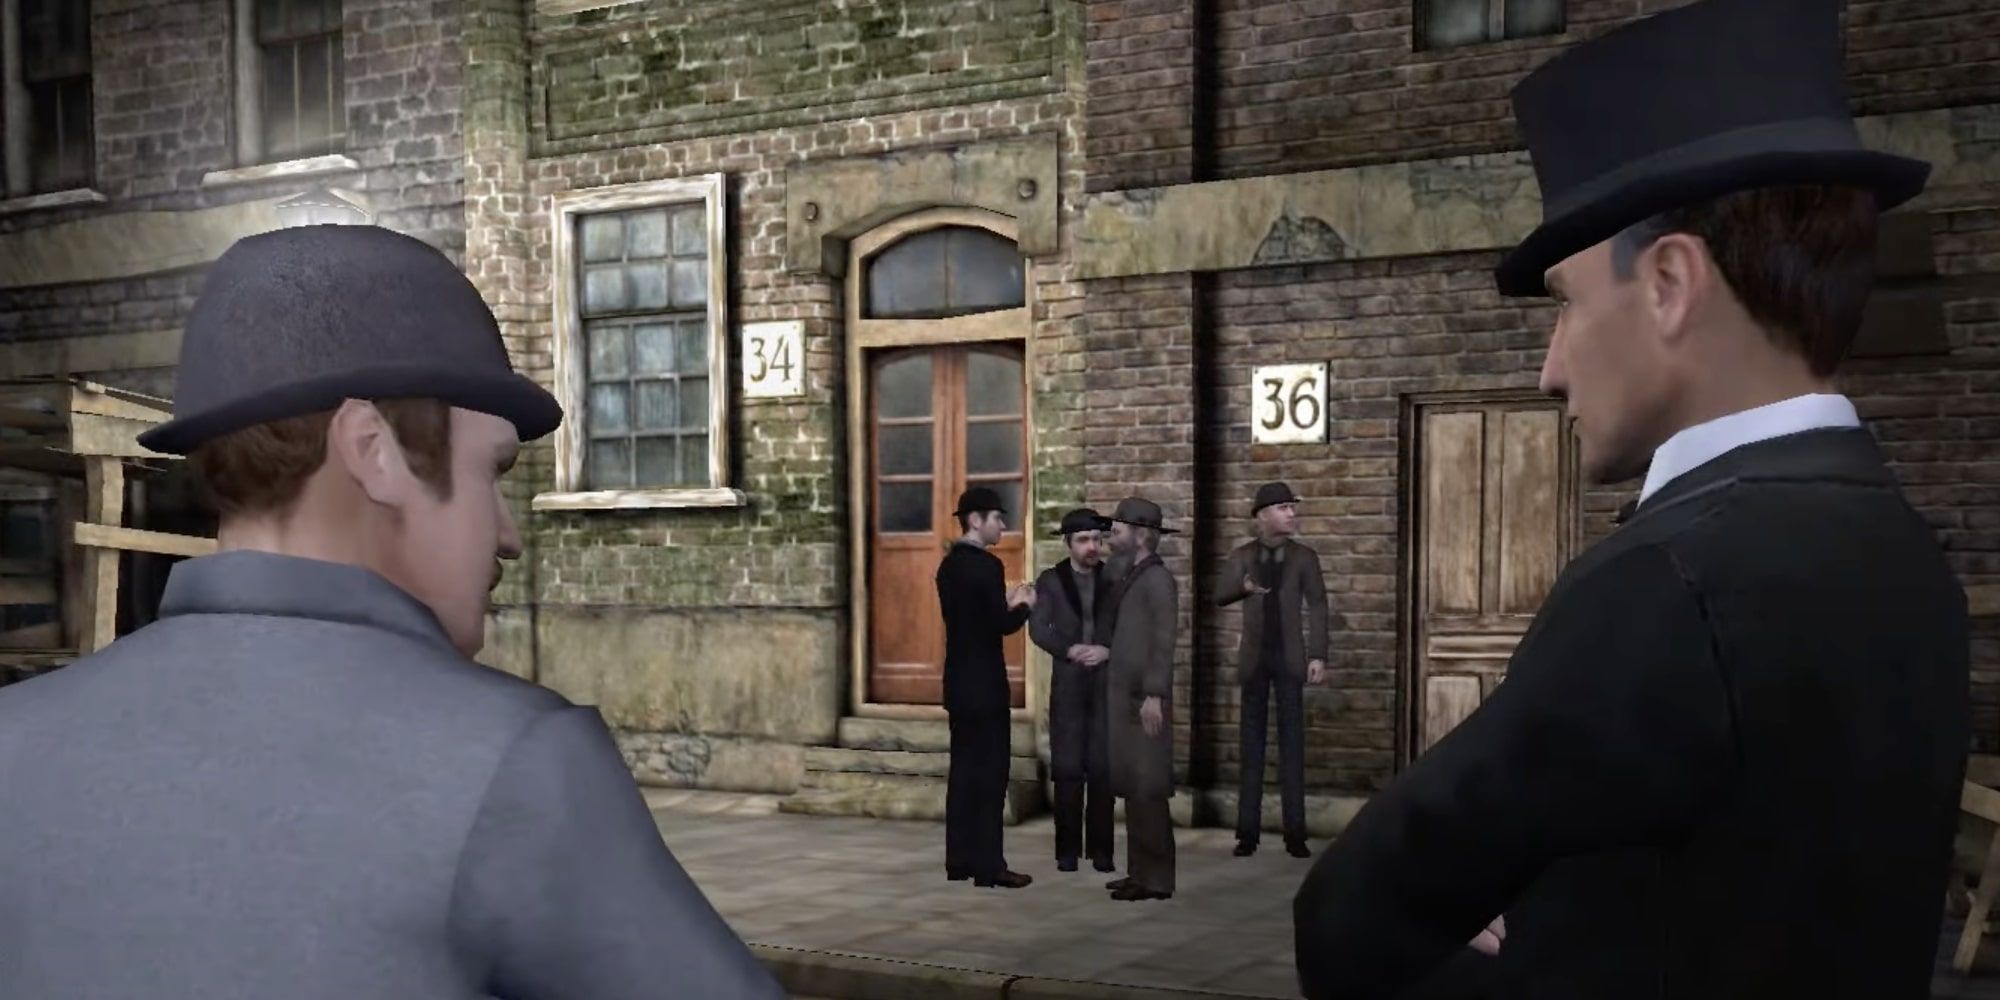 Sherlock and Dr Watson prepare to catch Jack the Ripper